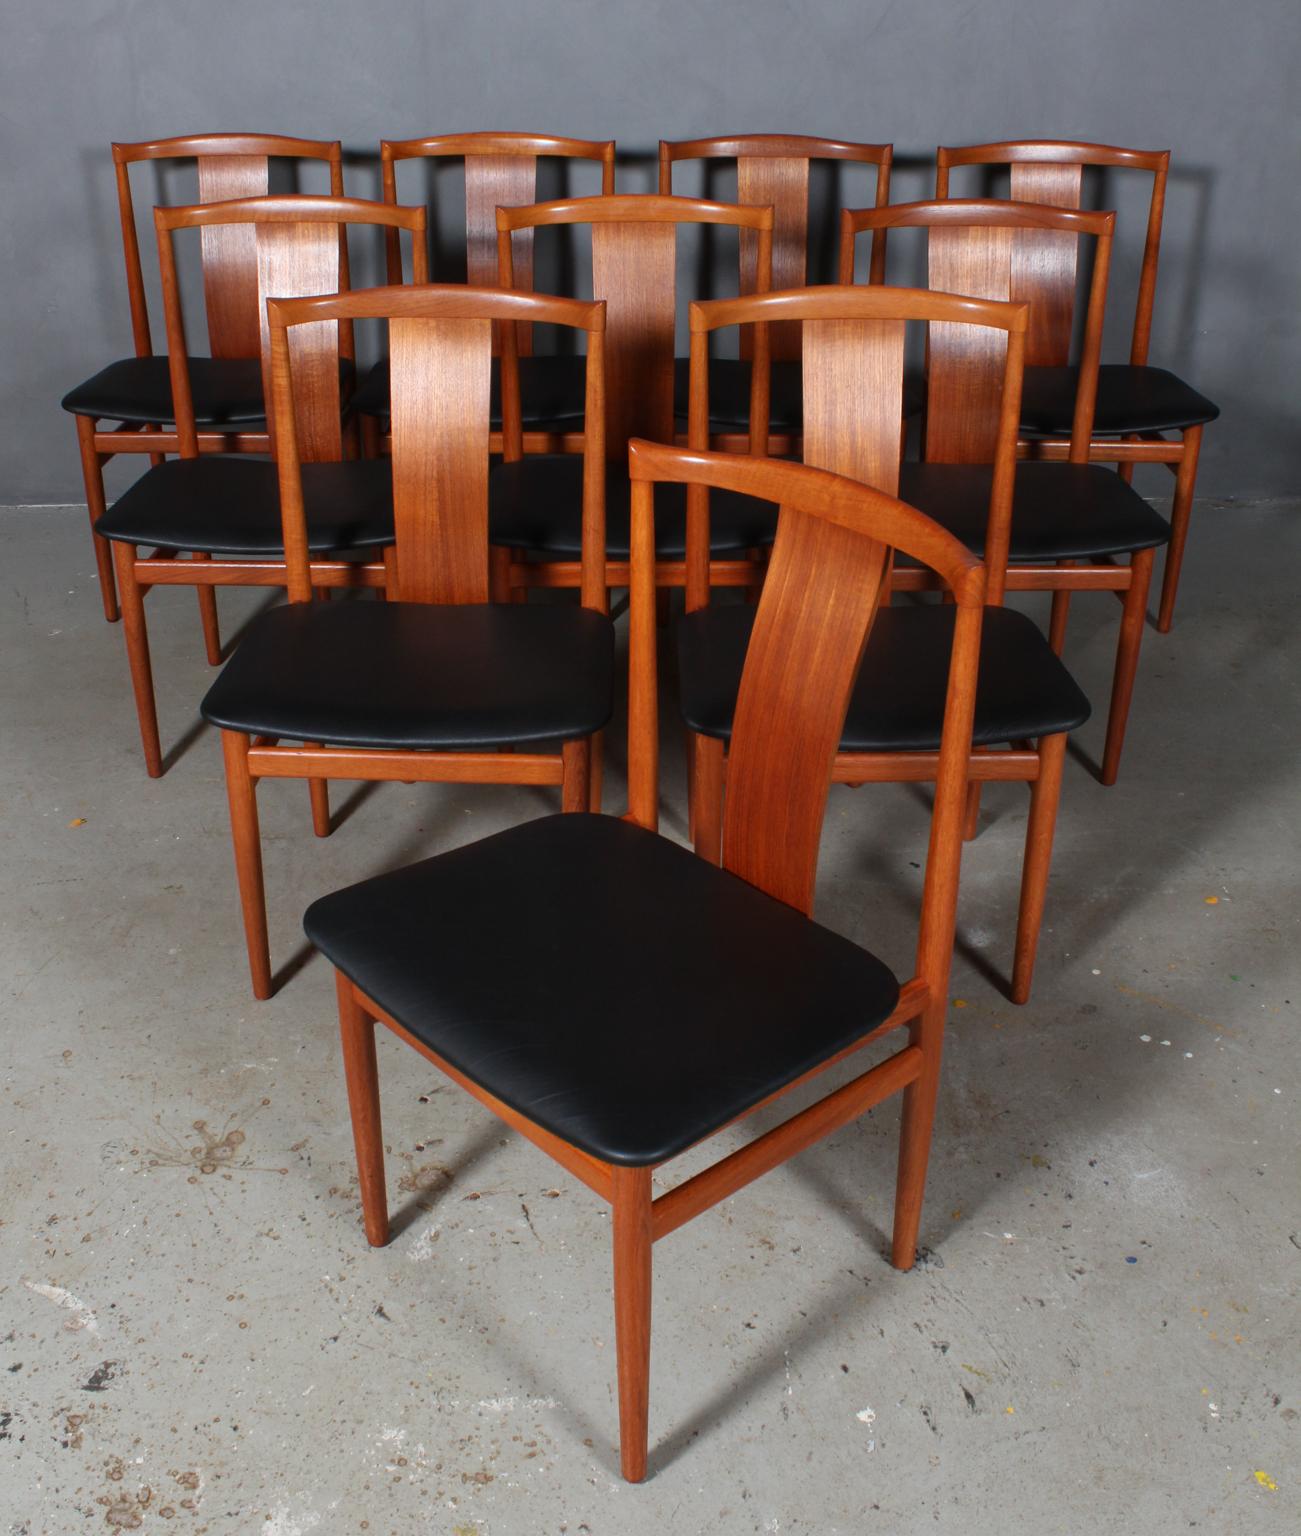 Henning Sørensen set of ten high back dining chairs in partly solid teak.

New upholstered with black aniline leather.

Made by Dan-EX in the 1960s.